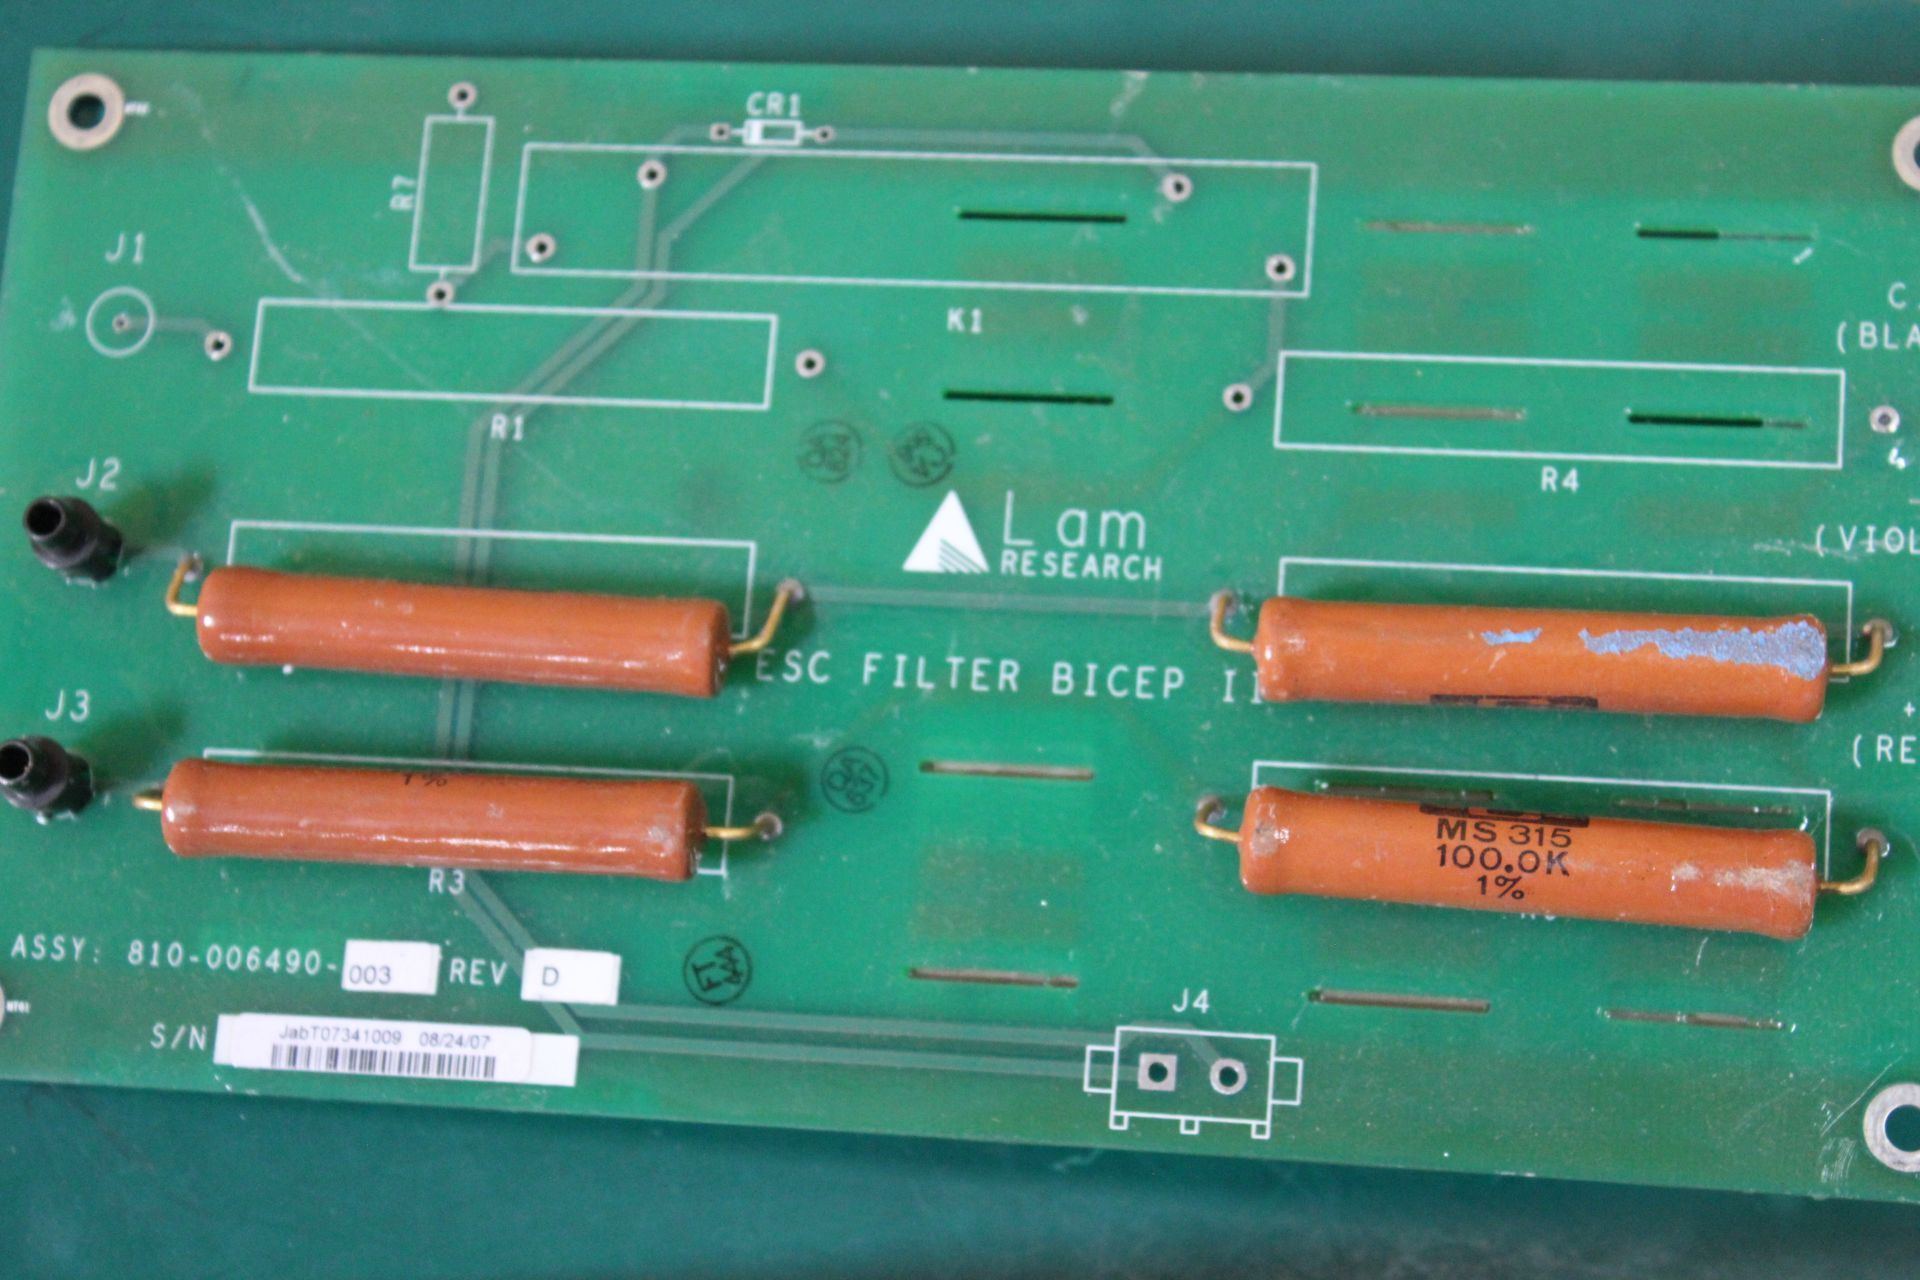 LOT OF LAM RESEARCH CIRCUIT BOARDS - Image 2 of 10